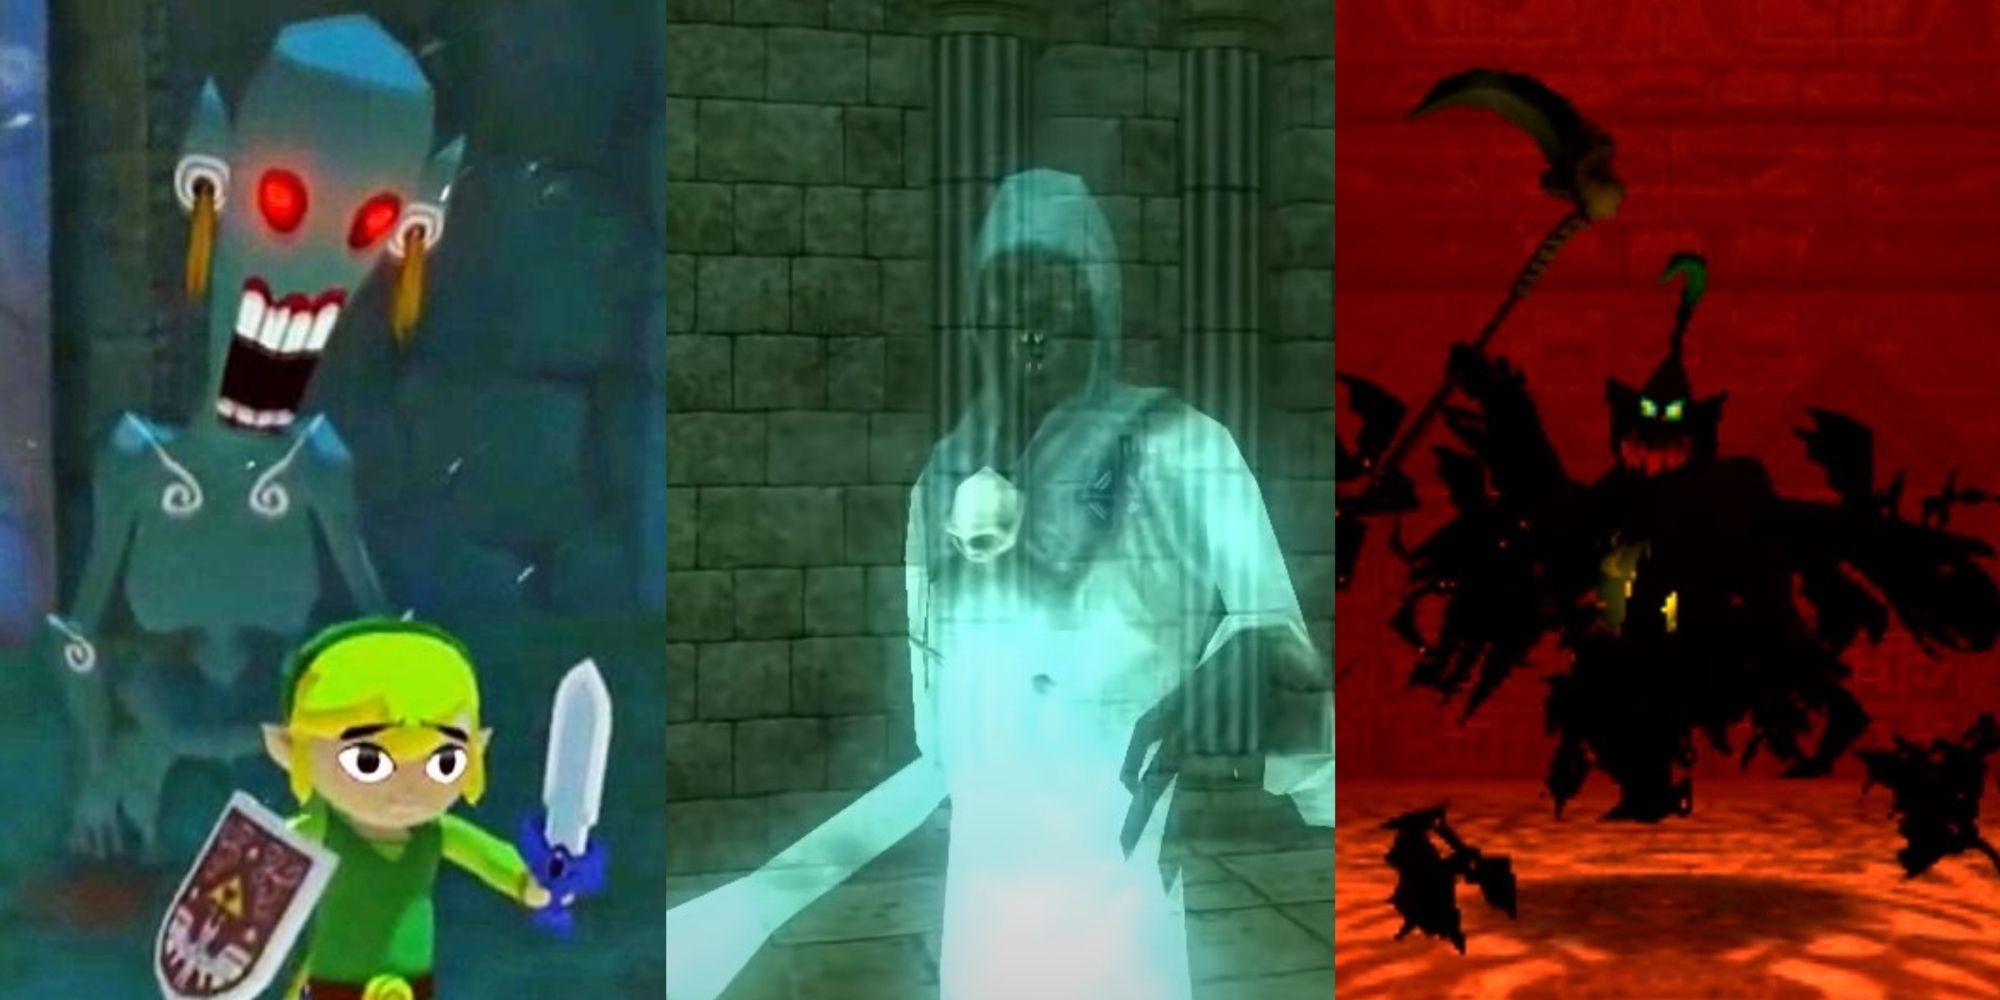 A ReDead in Wind Waker, a Big Poe in Twilight Princess, and Gomess in Majora's Mask